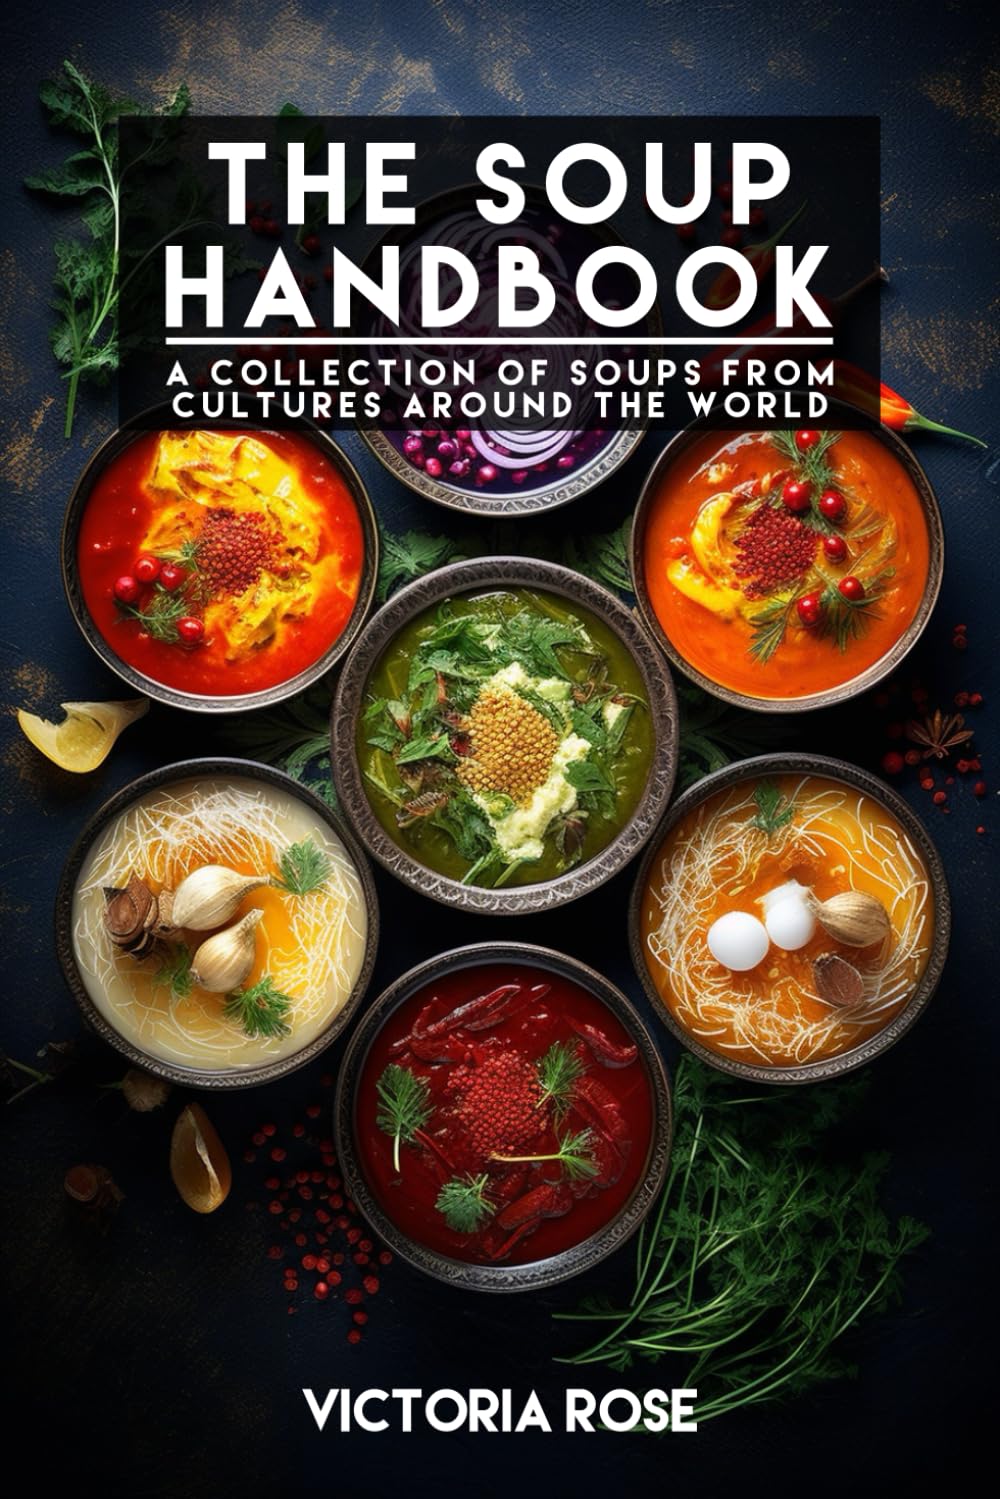 The Soup Handbook: A Collection Of Soups From Cultures Around The World